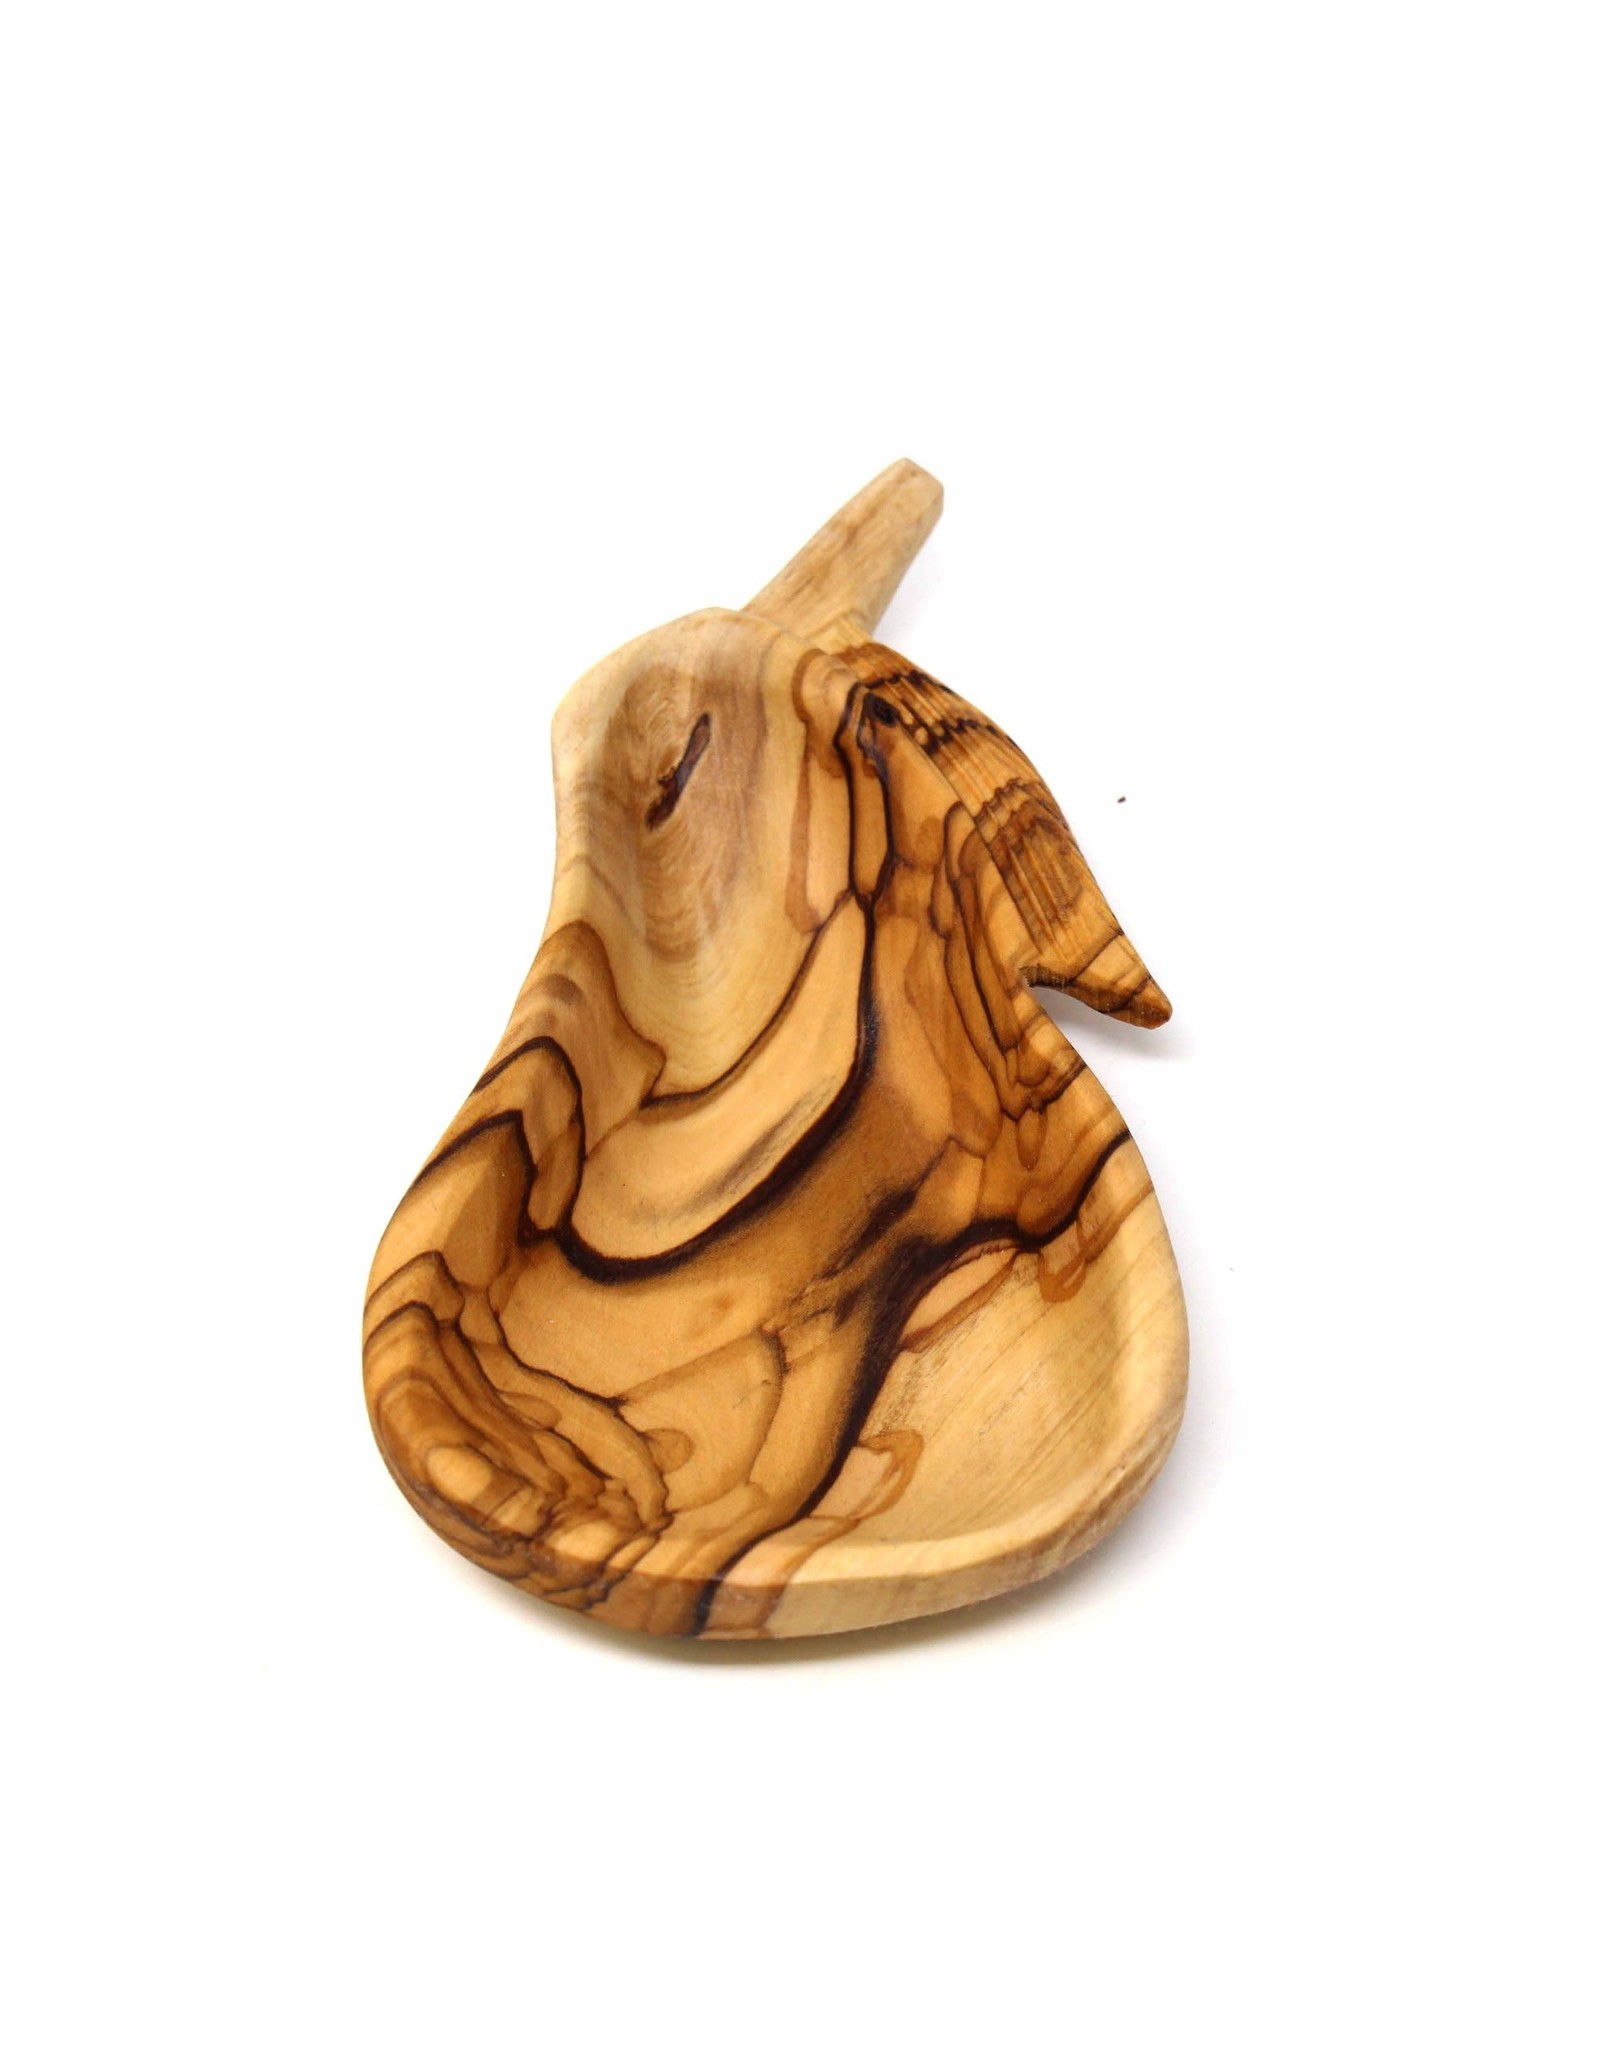 Trade roots Small Olive Wood Plate, Pear Shape